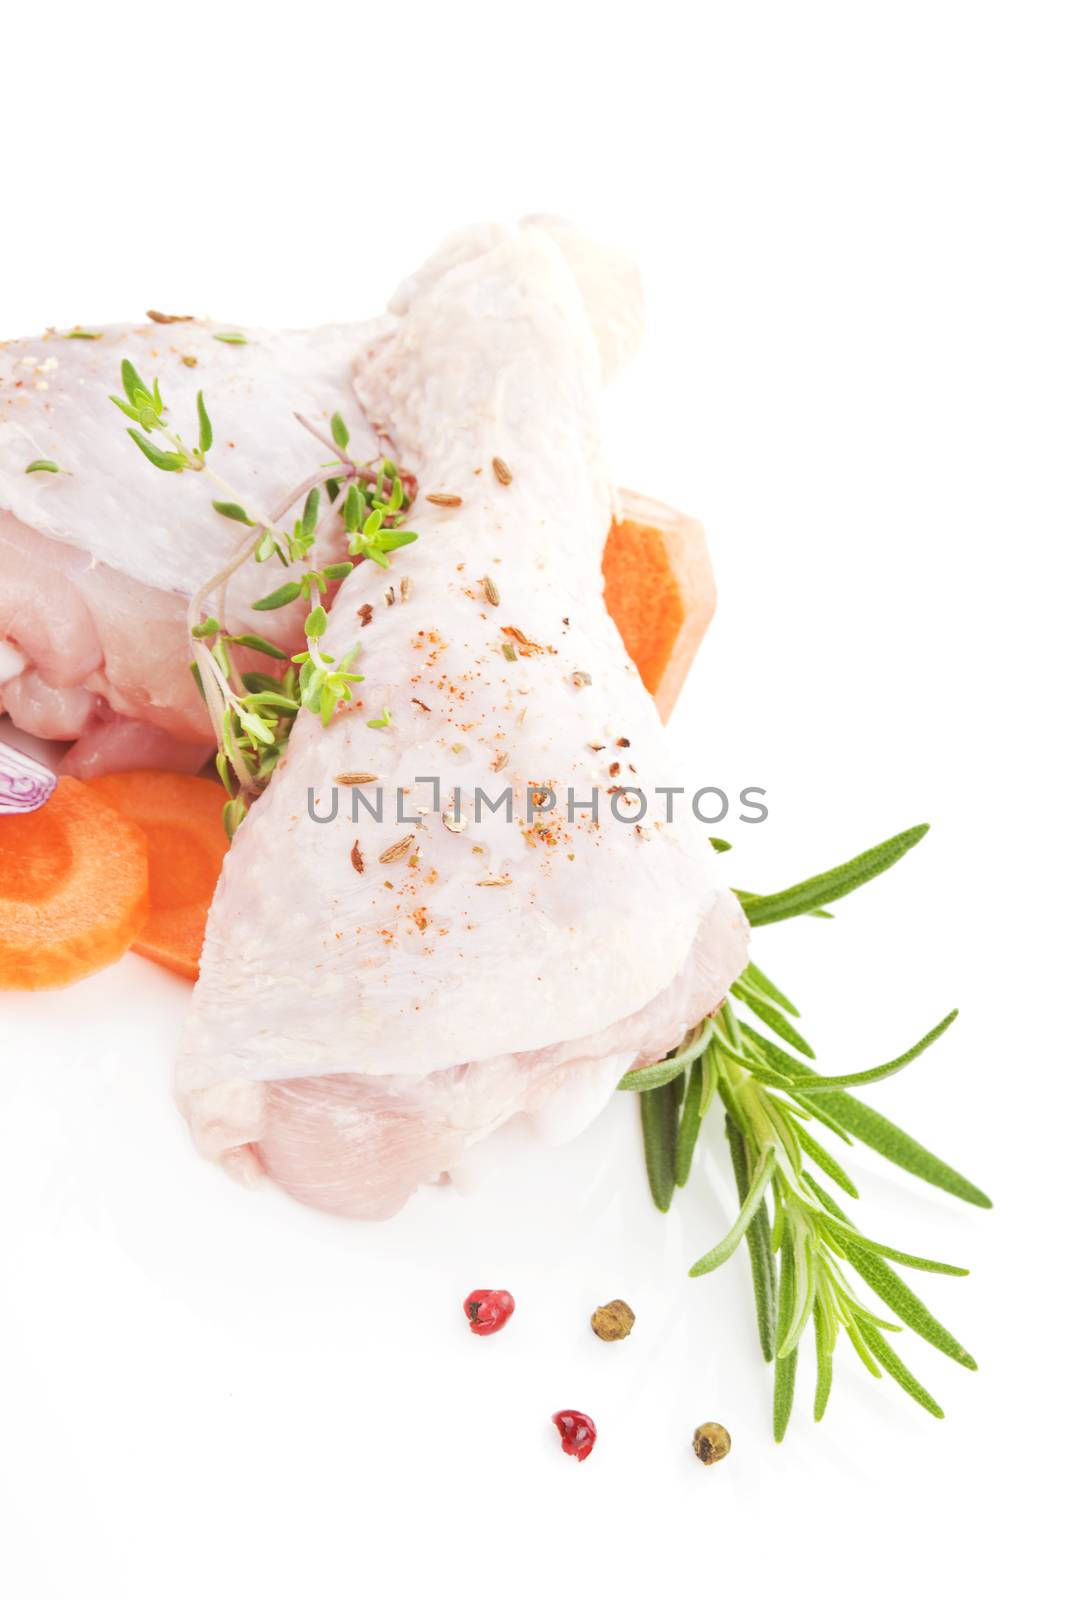 Chicken legs with fresh vegetables and herbs. by eskymaks